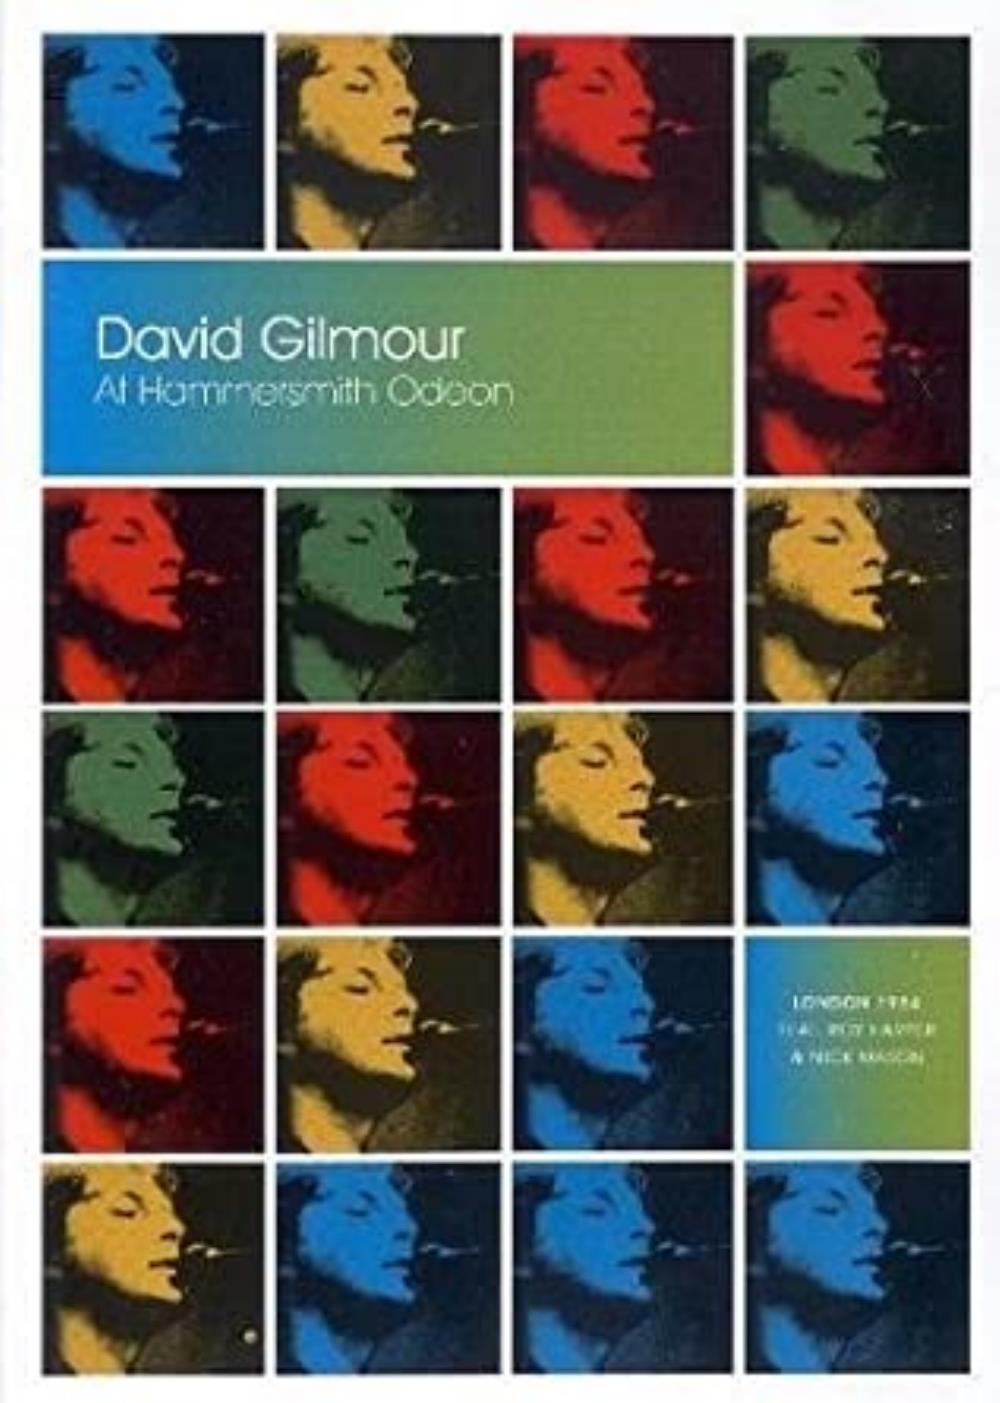 David Gilmour At Hammersmith Odeon album cover